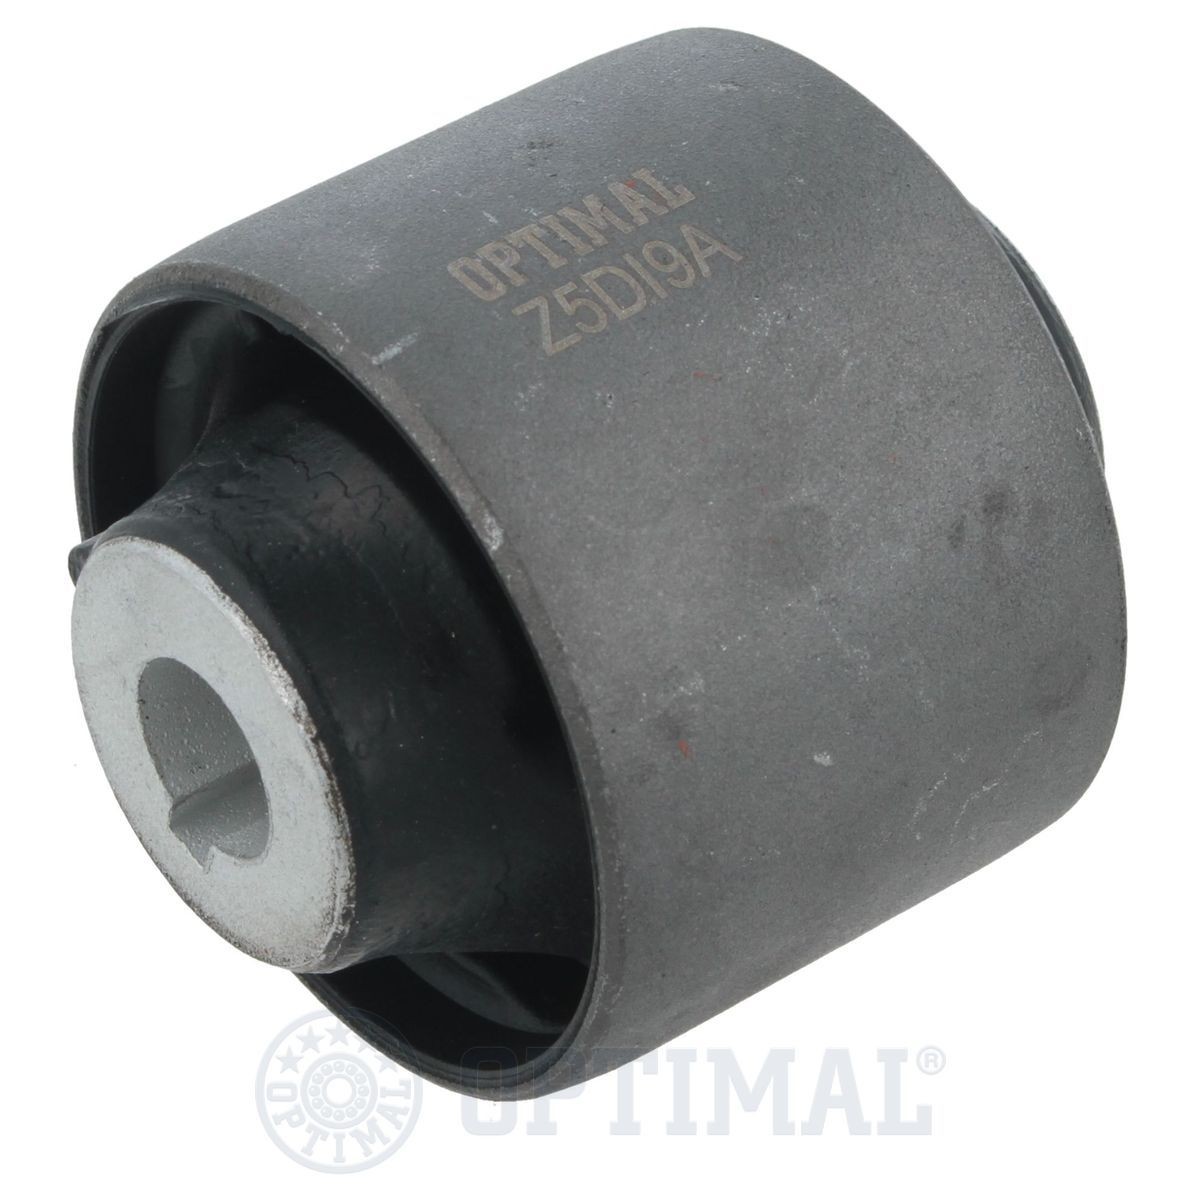 F9-0064 OPTIMAL Suspension bushes HYUNDAI Lower, Front Axle, both sides, Rubber-Metal Mount